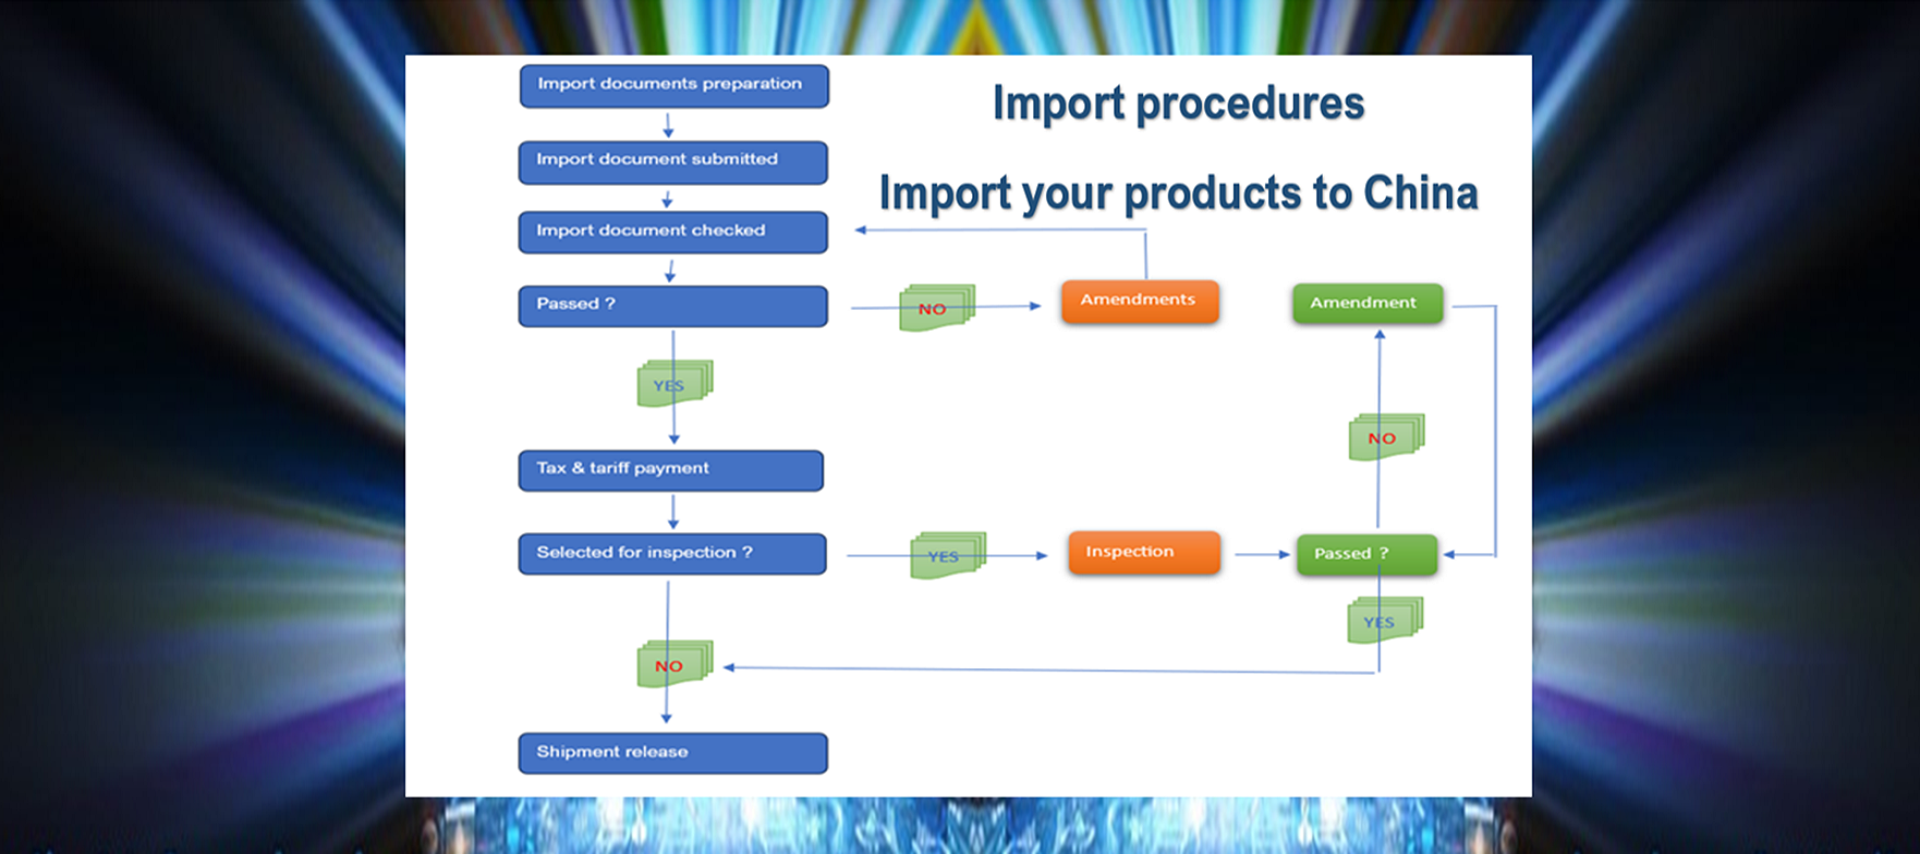 China Imports Procedures Overview (Standard)